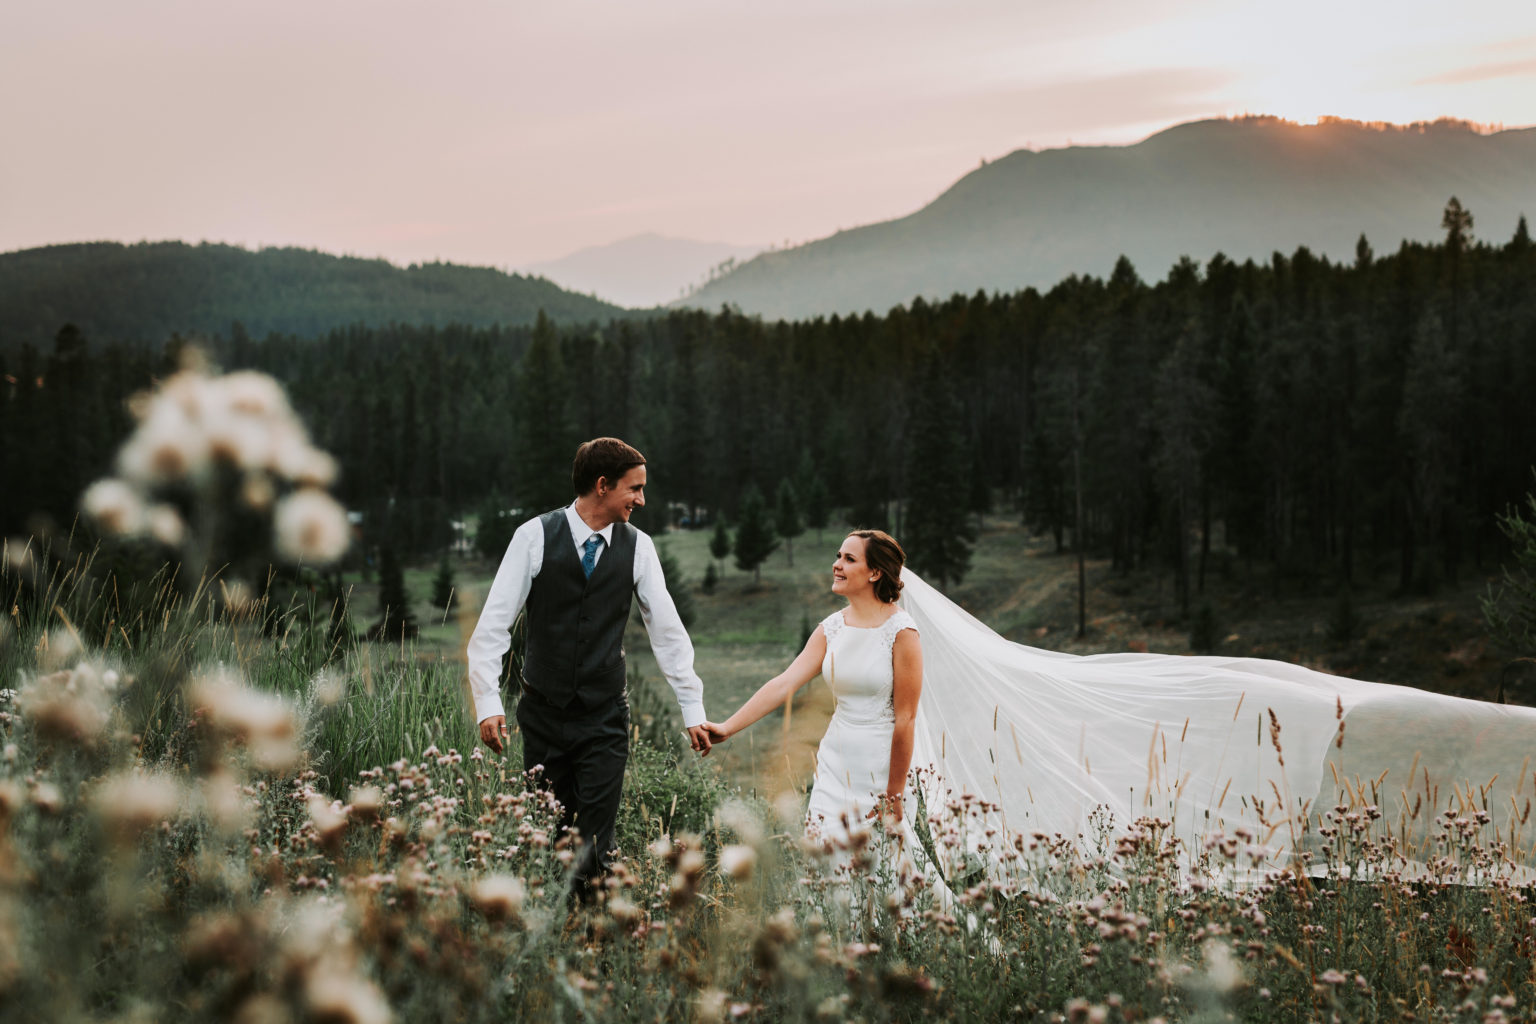 How to Elope in Glacier National Park - Big Day Celebrations